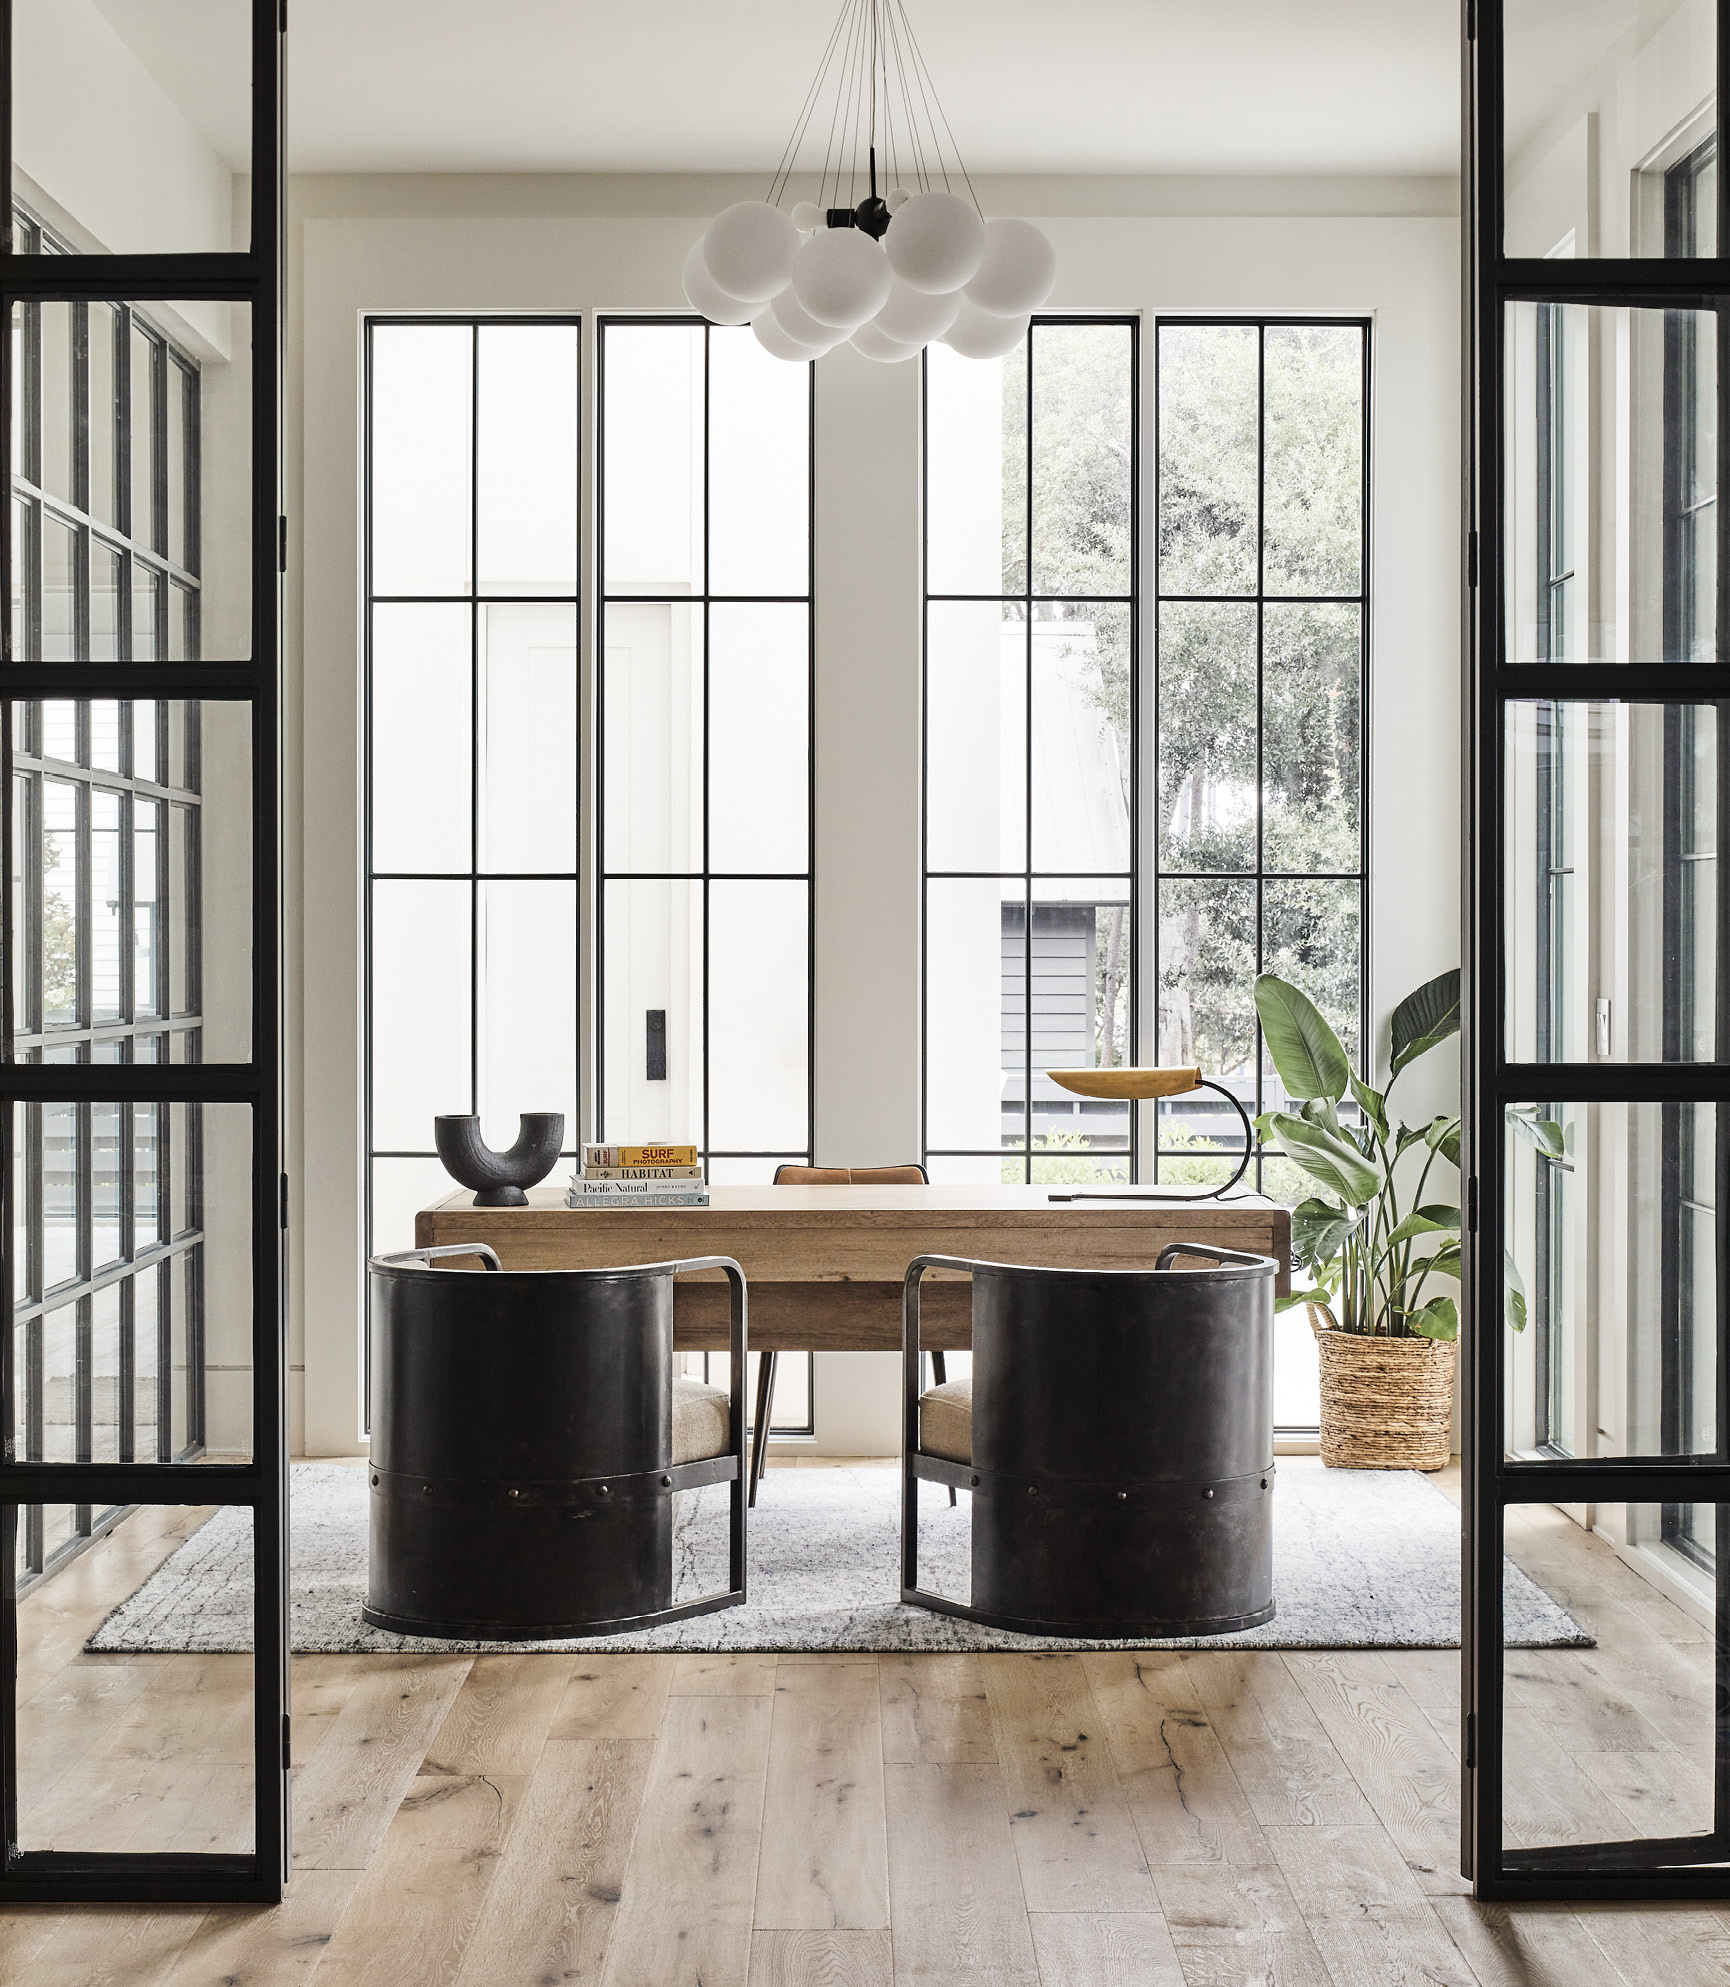 Iron barrel-back chairs and a bulbous chandelier provide balance in the rectilinear iron and glass home office, where a washed walnut desk from Noir adds warmth.